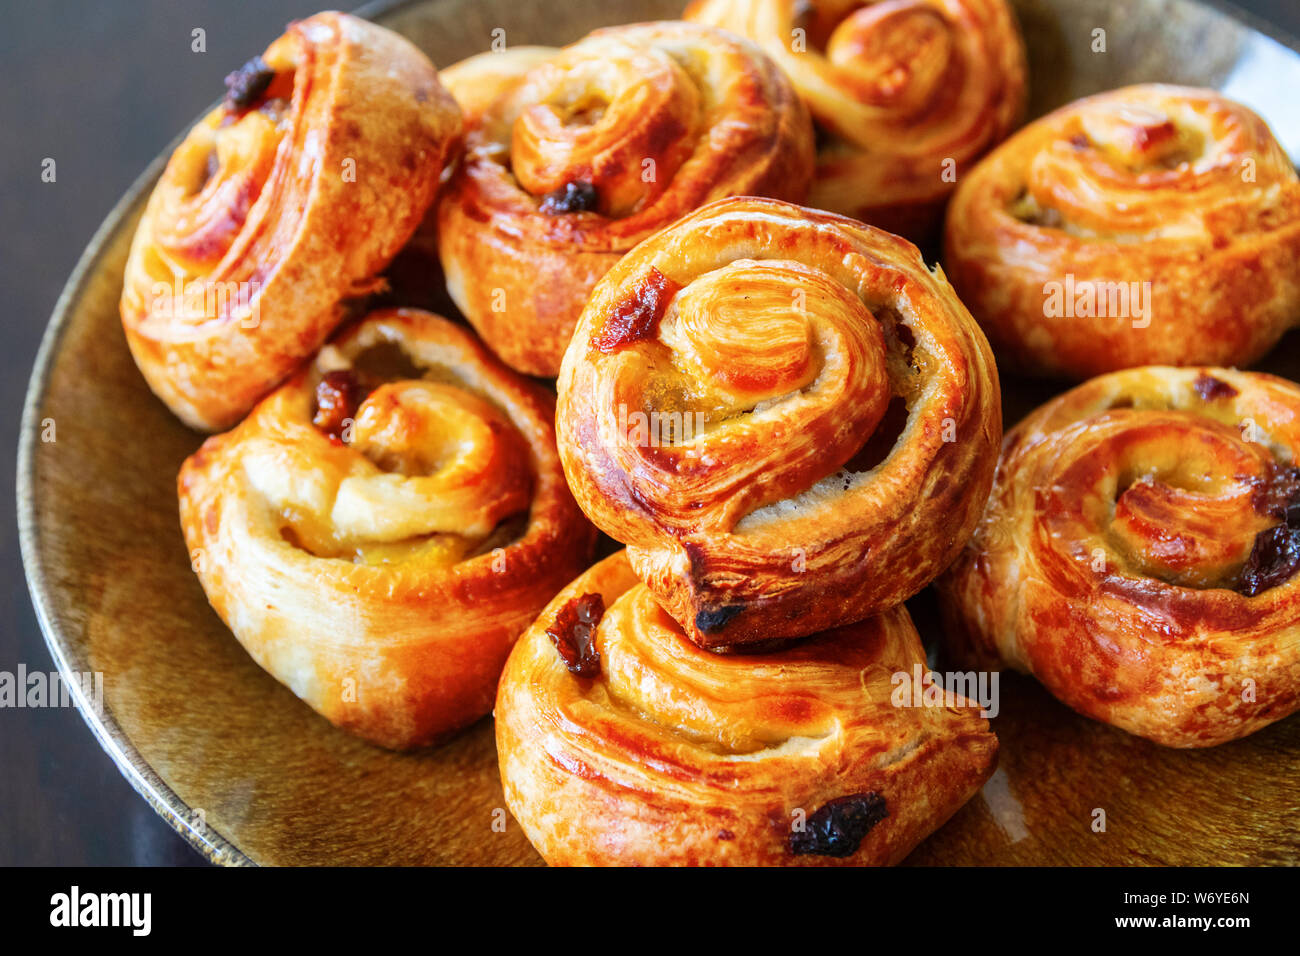 Delicicous golden brown pain aux raisins or raisin swirls, typical danish and french pastry, on a plate. Stock Photo